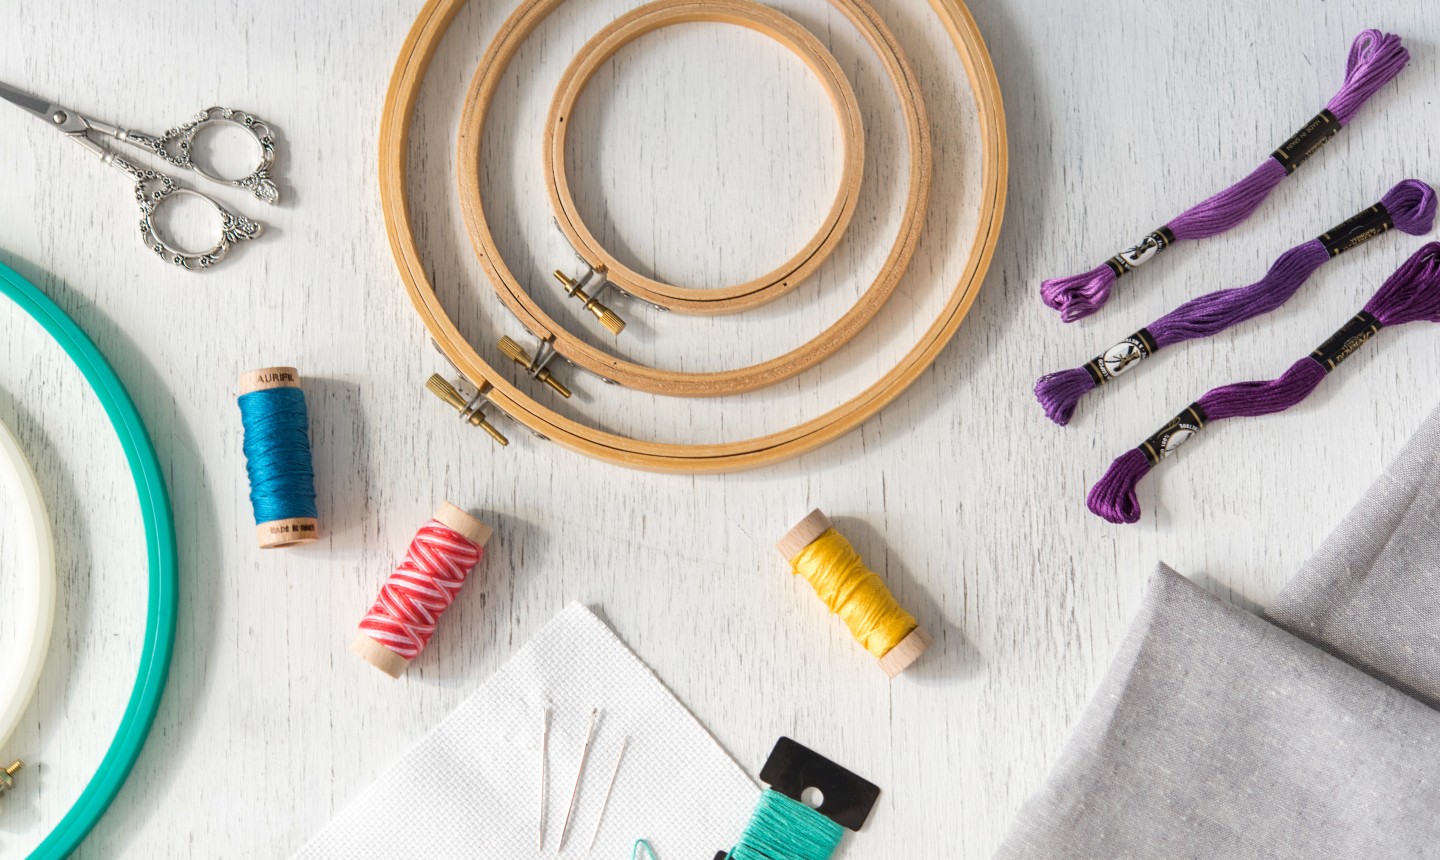 5 Tools Every Hand Embroidery Newbie Should Own